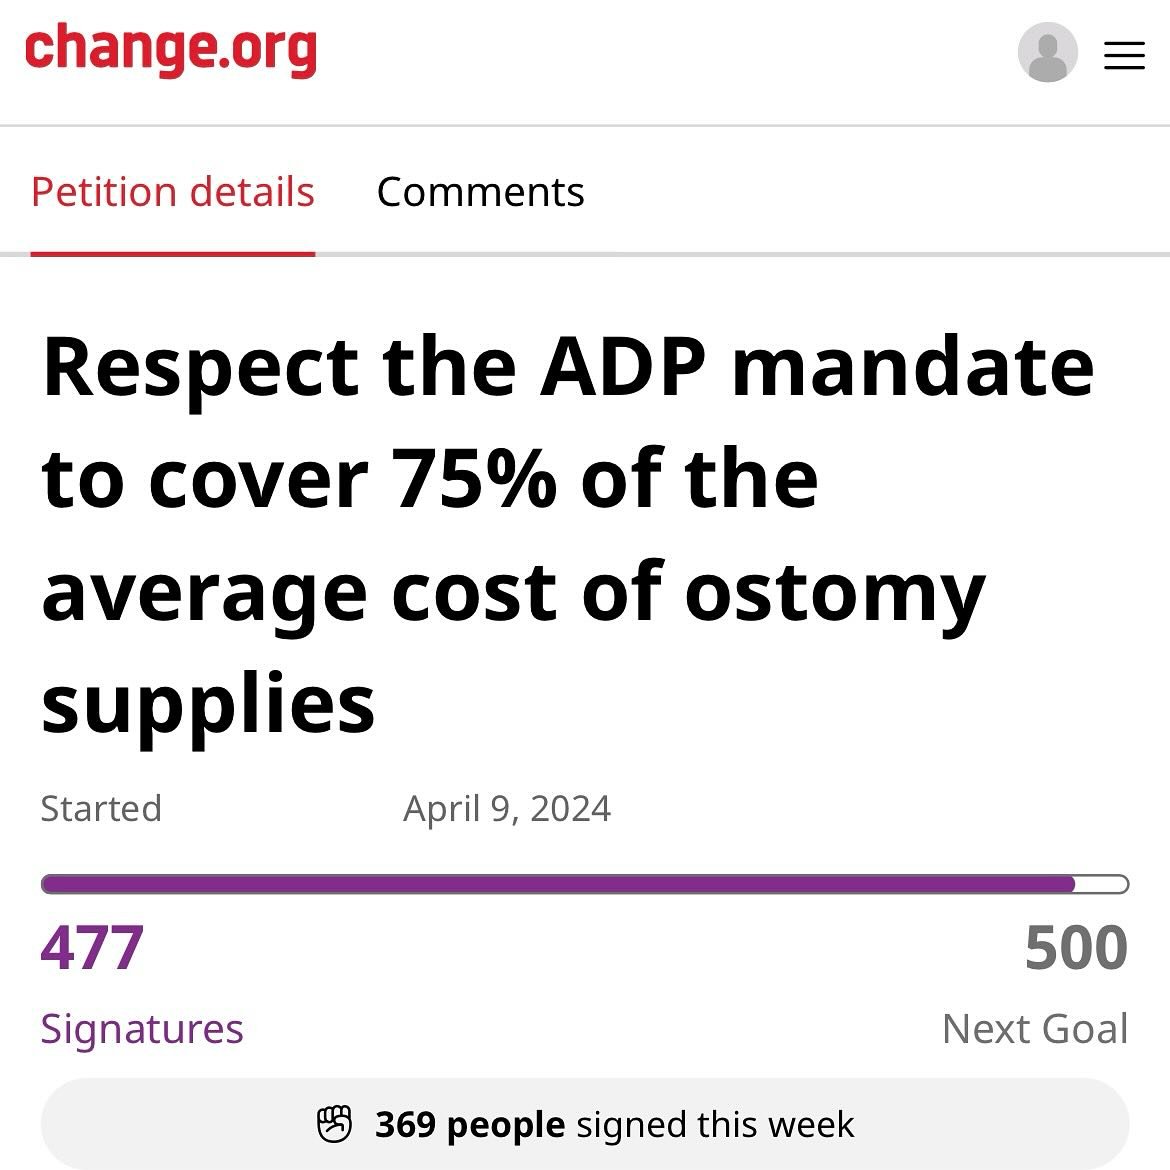 @ostomy_canada on behalf of people living with an ostomy petition the Legislative Assembly of Ontario as follows: swipe to read. 

Sign the petition here: https://tinyurl.com/mwsu7ccr

#canada #adp #petition #ostomy #ostomycanada #ostomytoronto